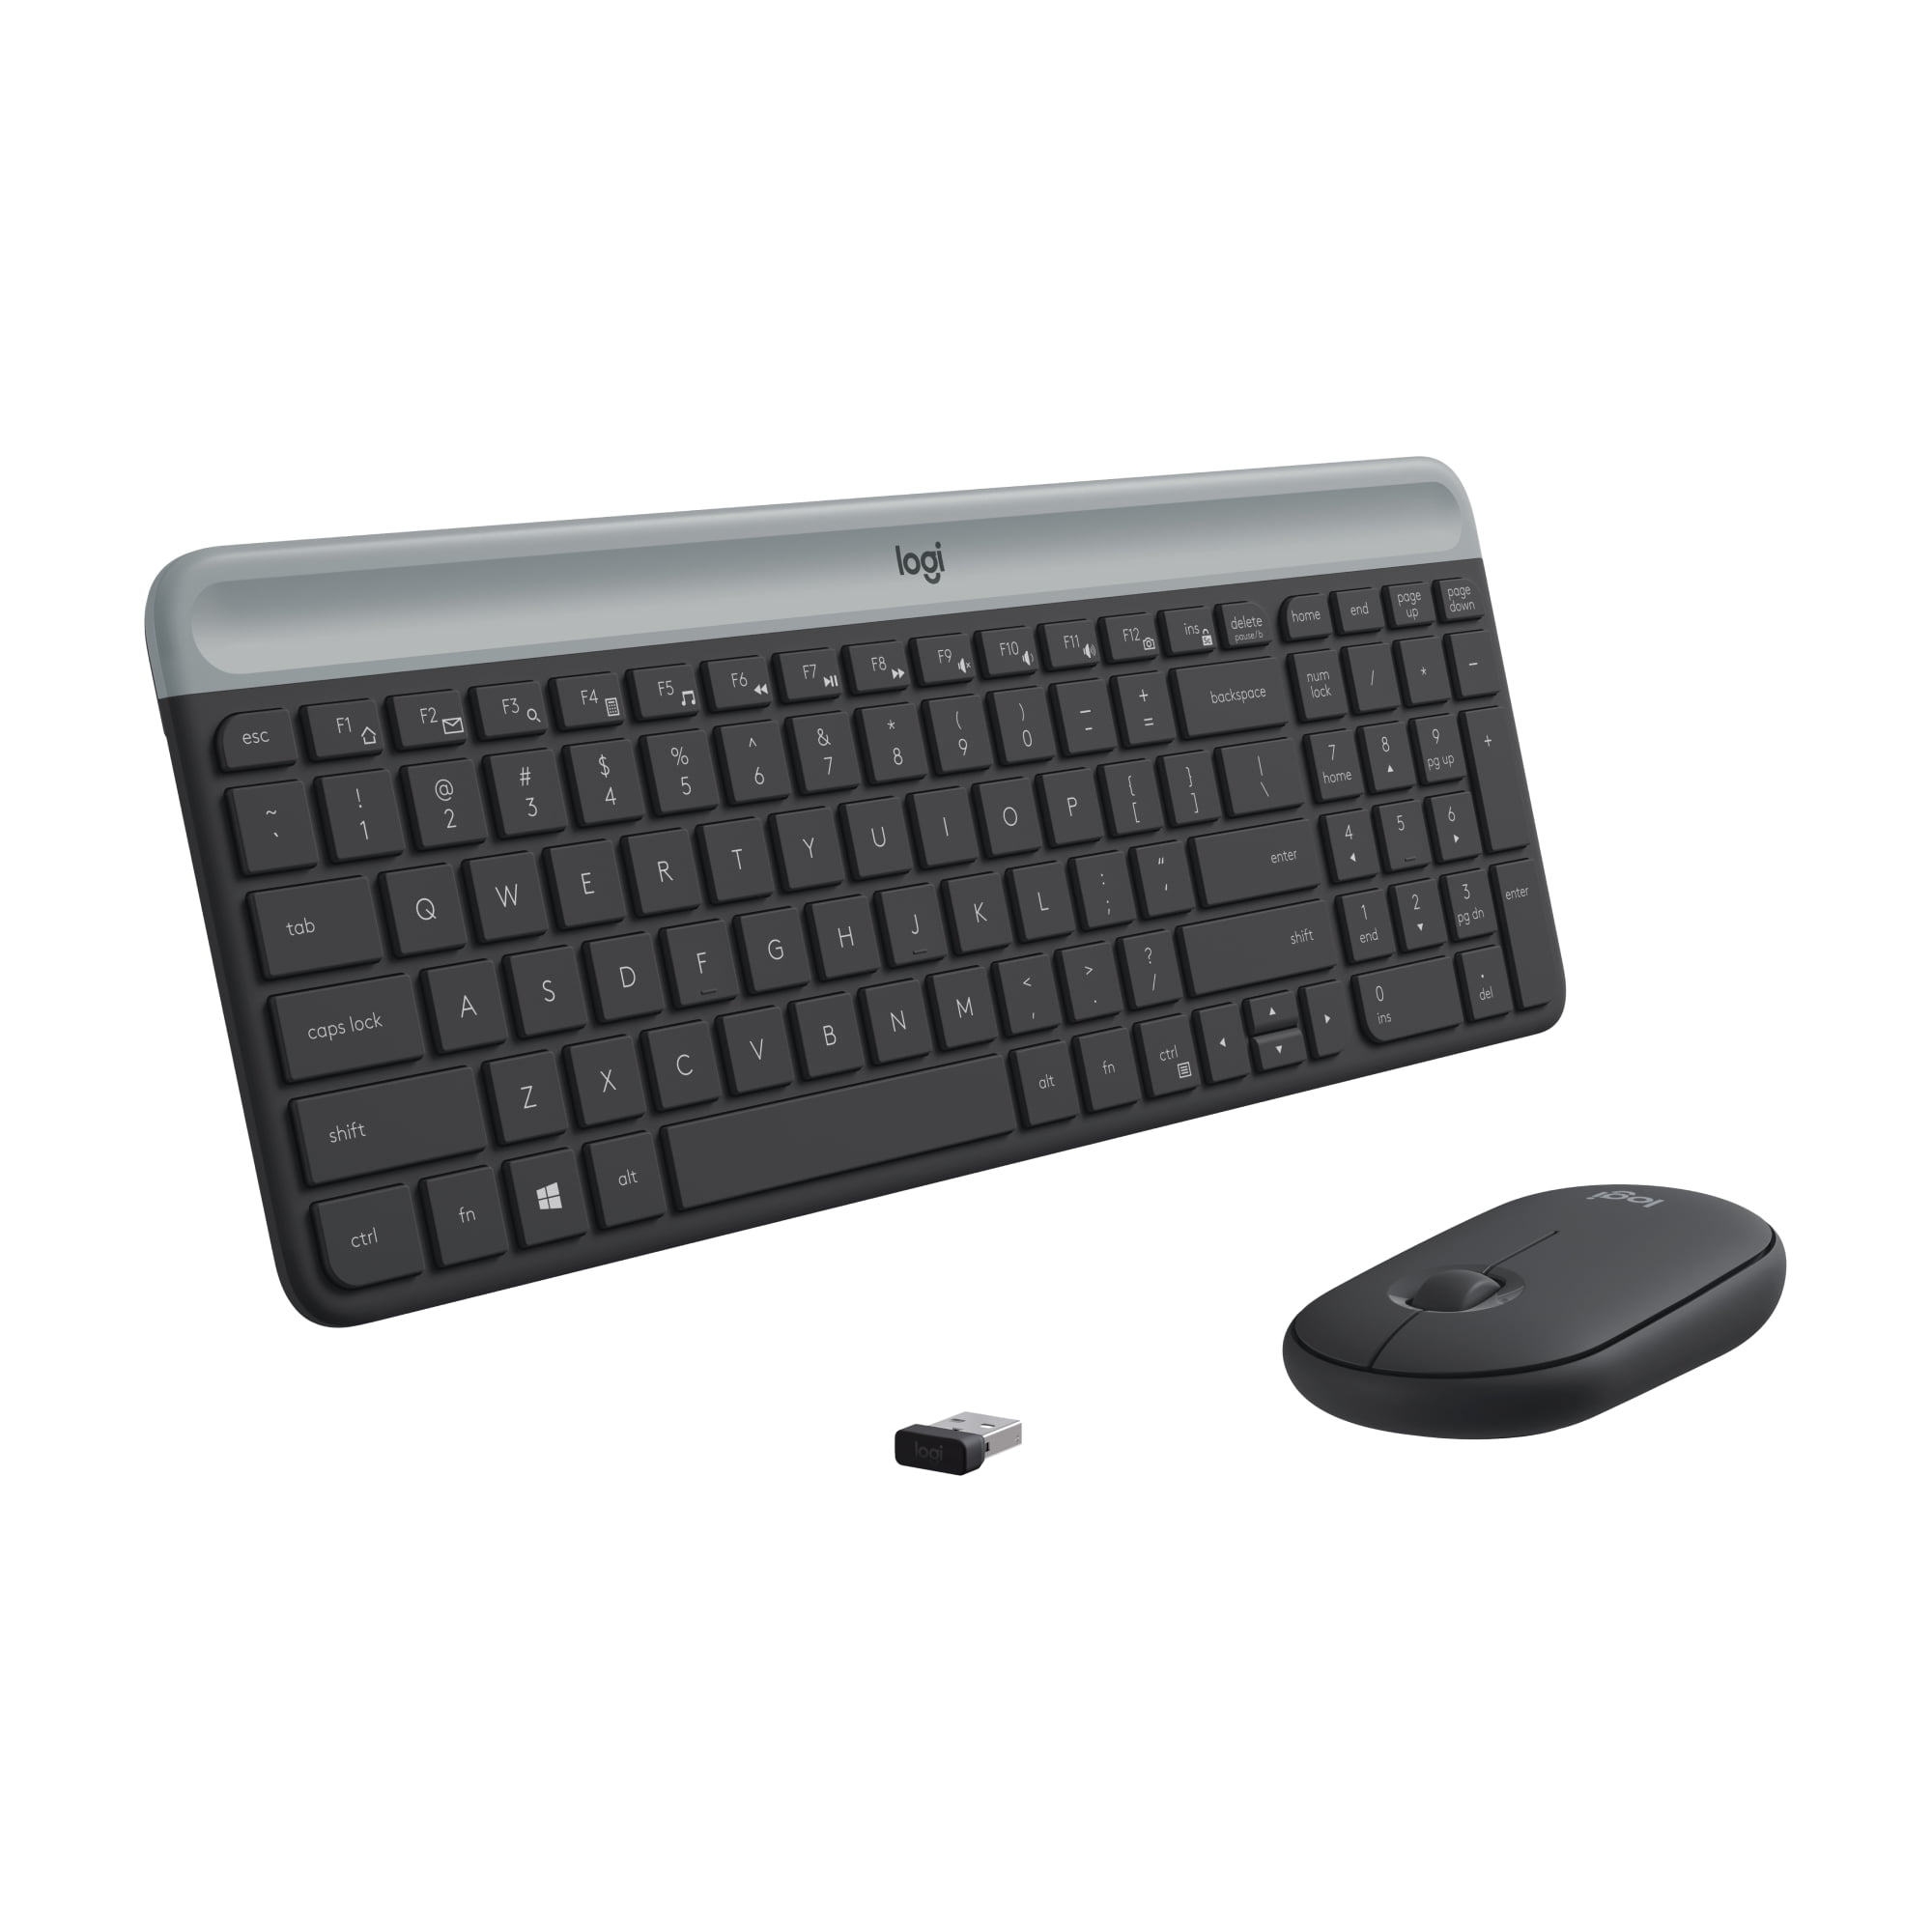 Mpow Wireless Keyboard and Mouse Combo Ultra-Thin Chiclet Keyboard and Mute Mouse 2.4GHz 26ft Wireless Connection with USB Receiver for PC Desktop Computer Laptop Mac Tablet Black 